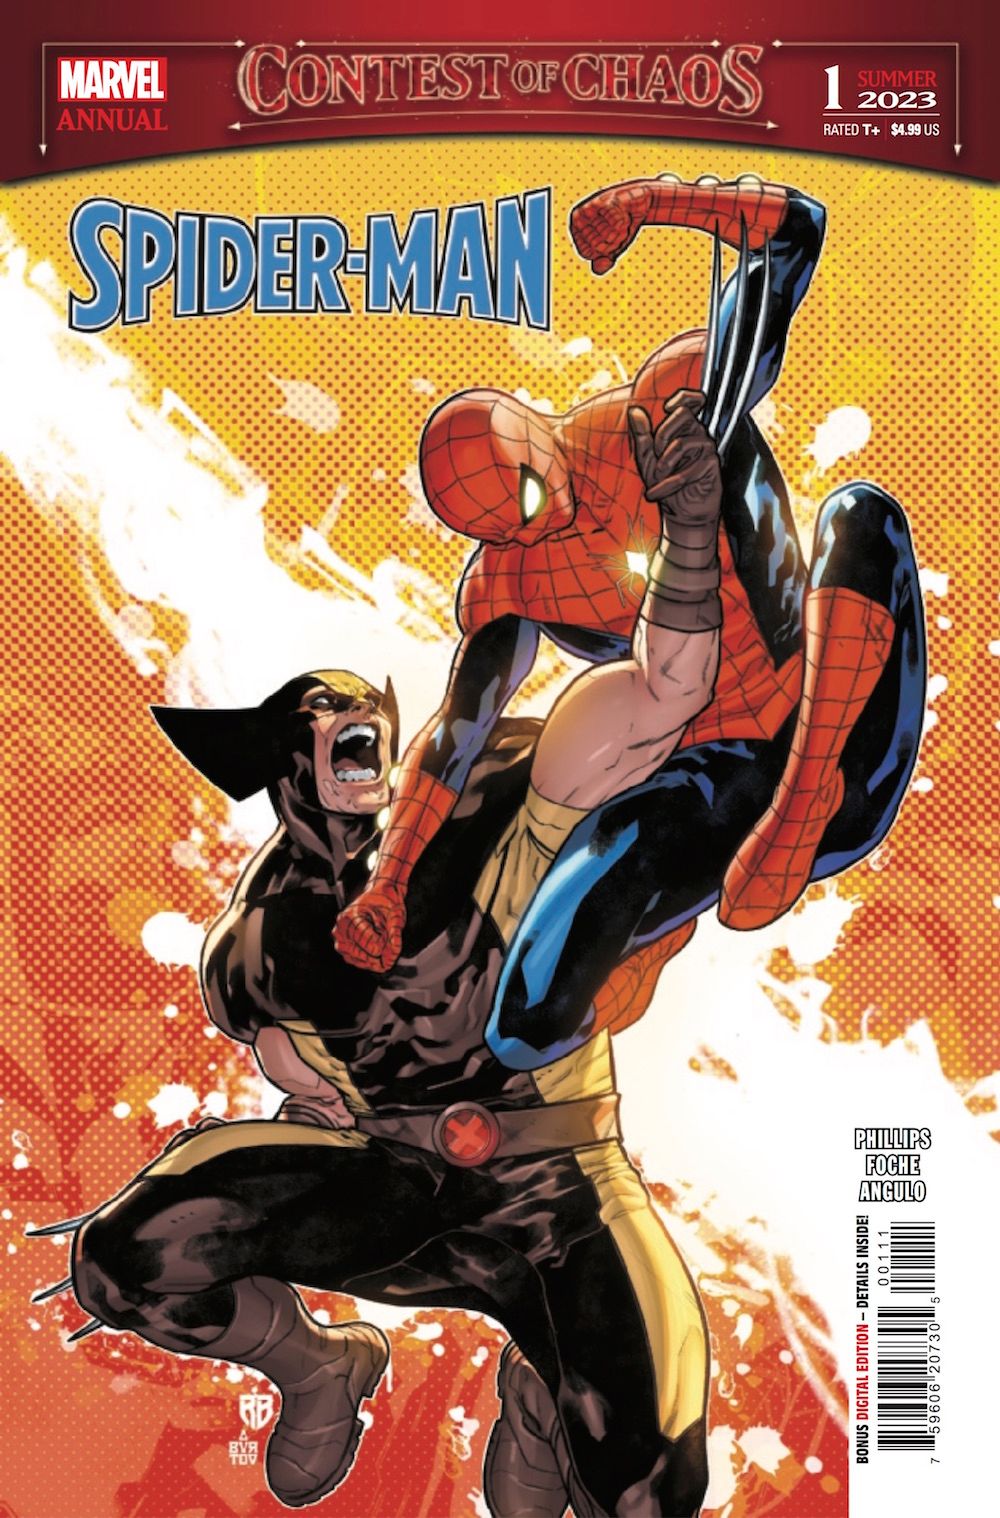 Spider-Man Annual 2023 Review